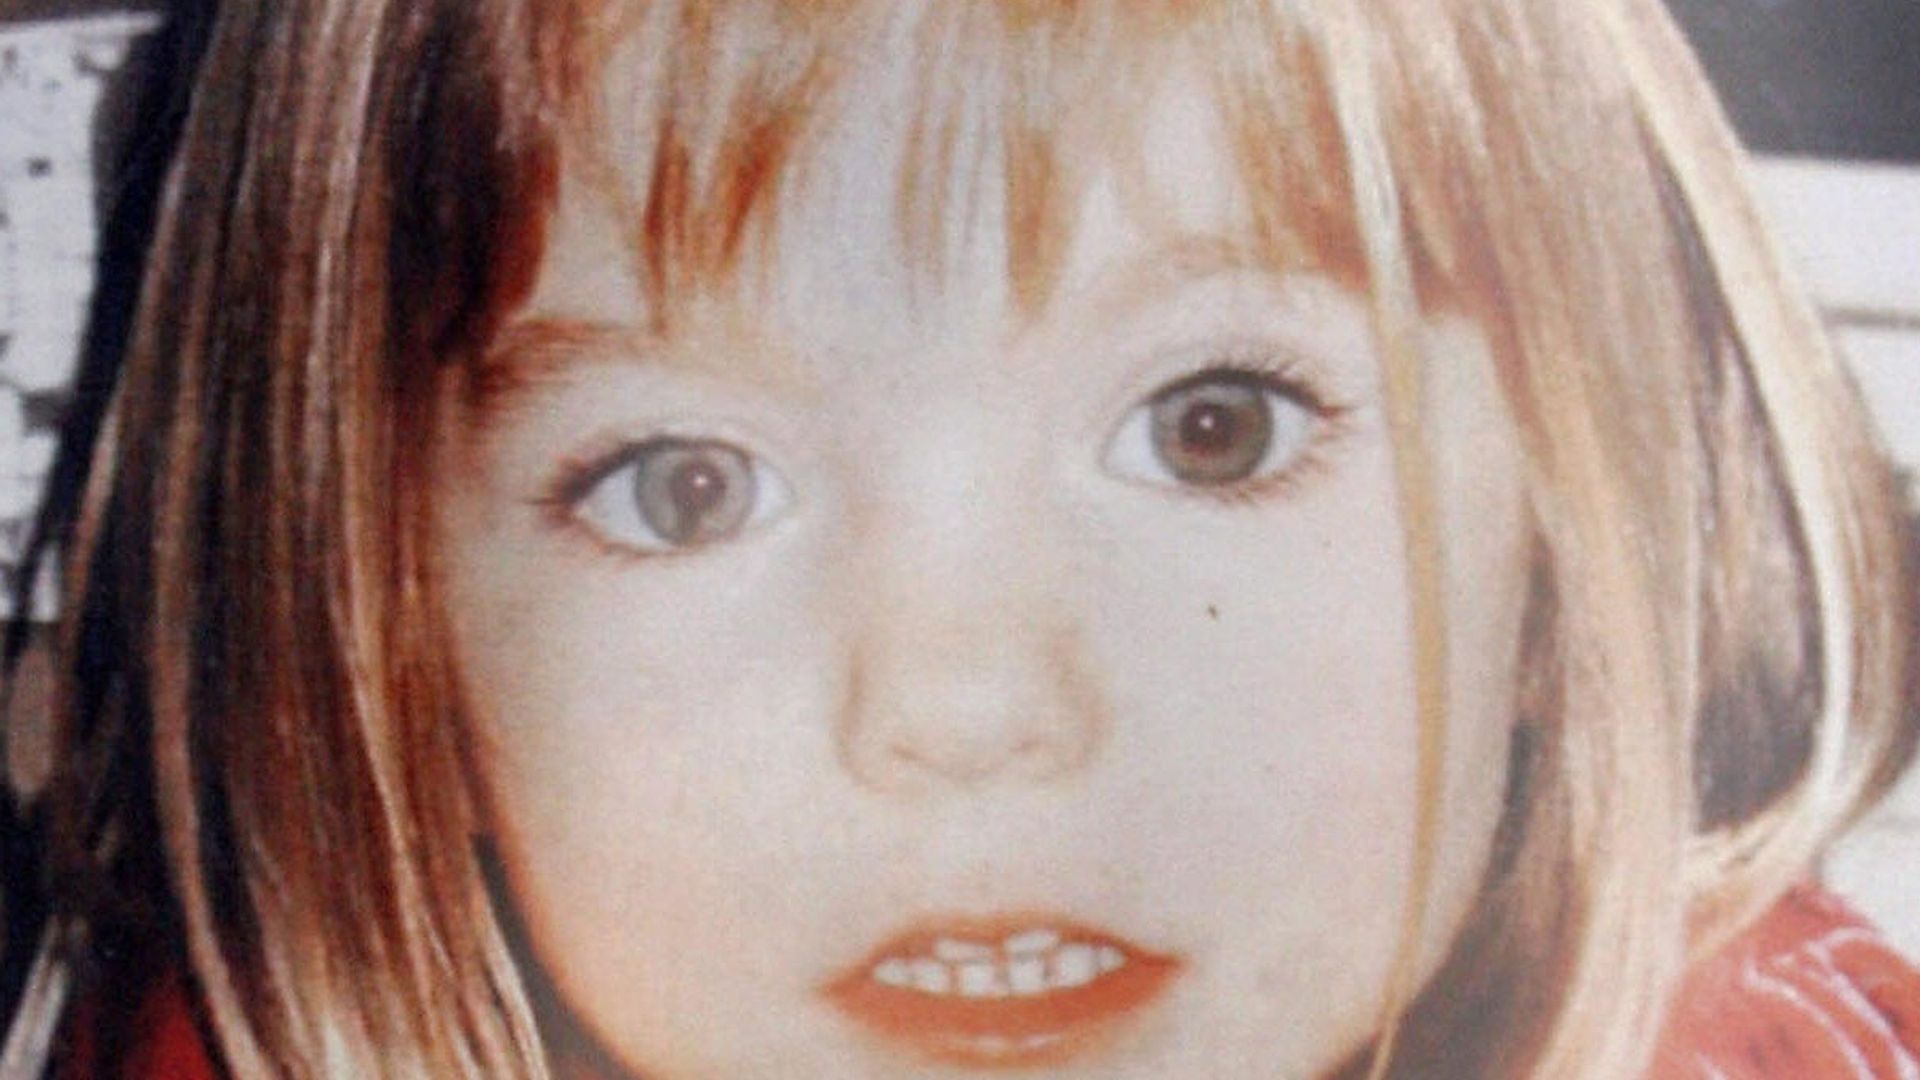 Madeleine McCann's parents release statement after authorities formally name a new suspect